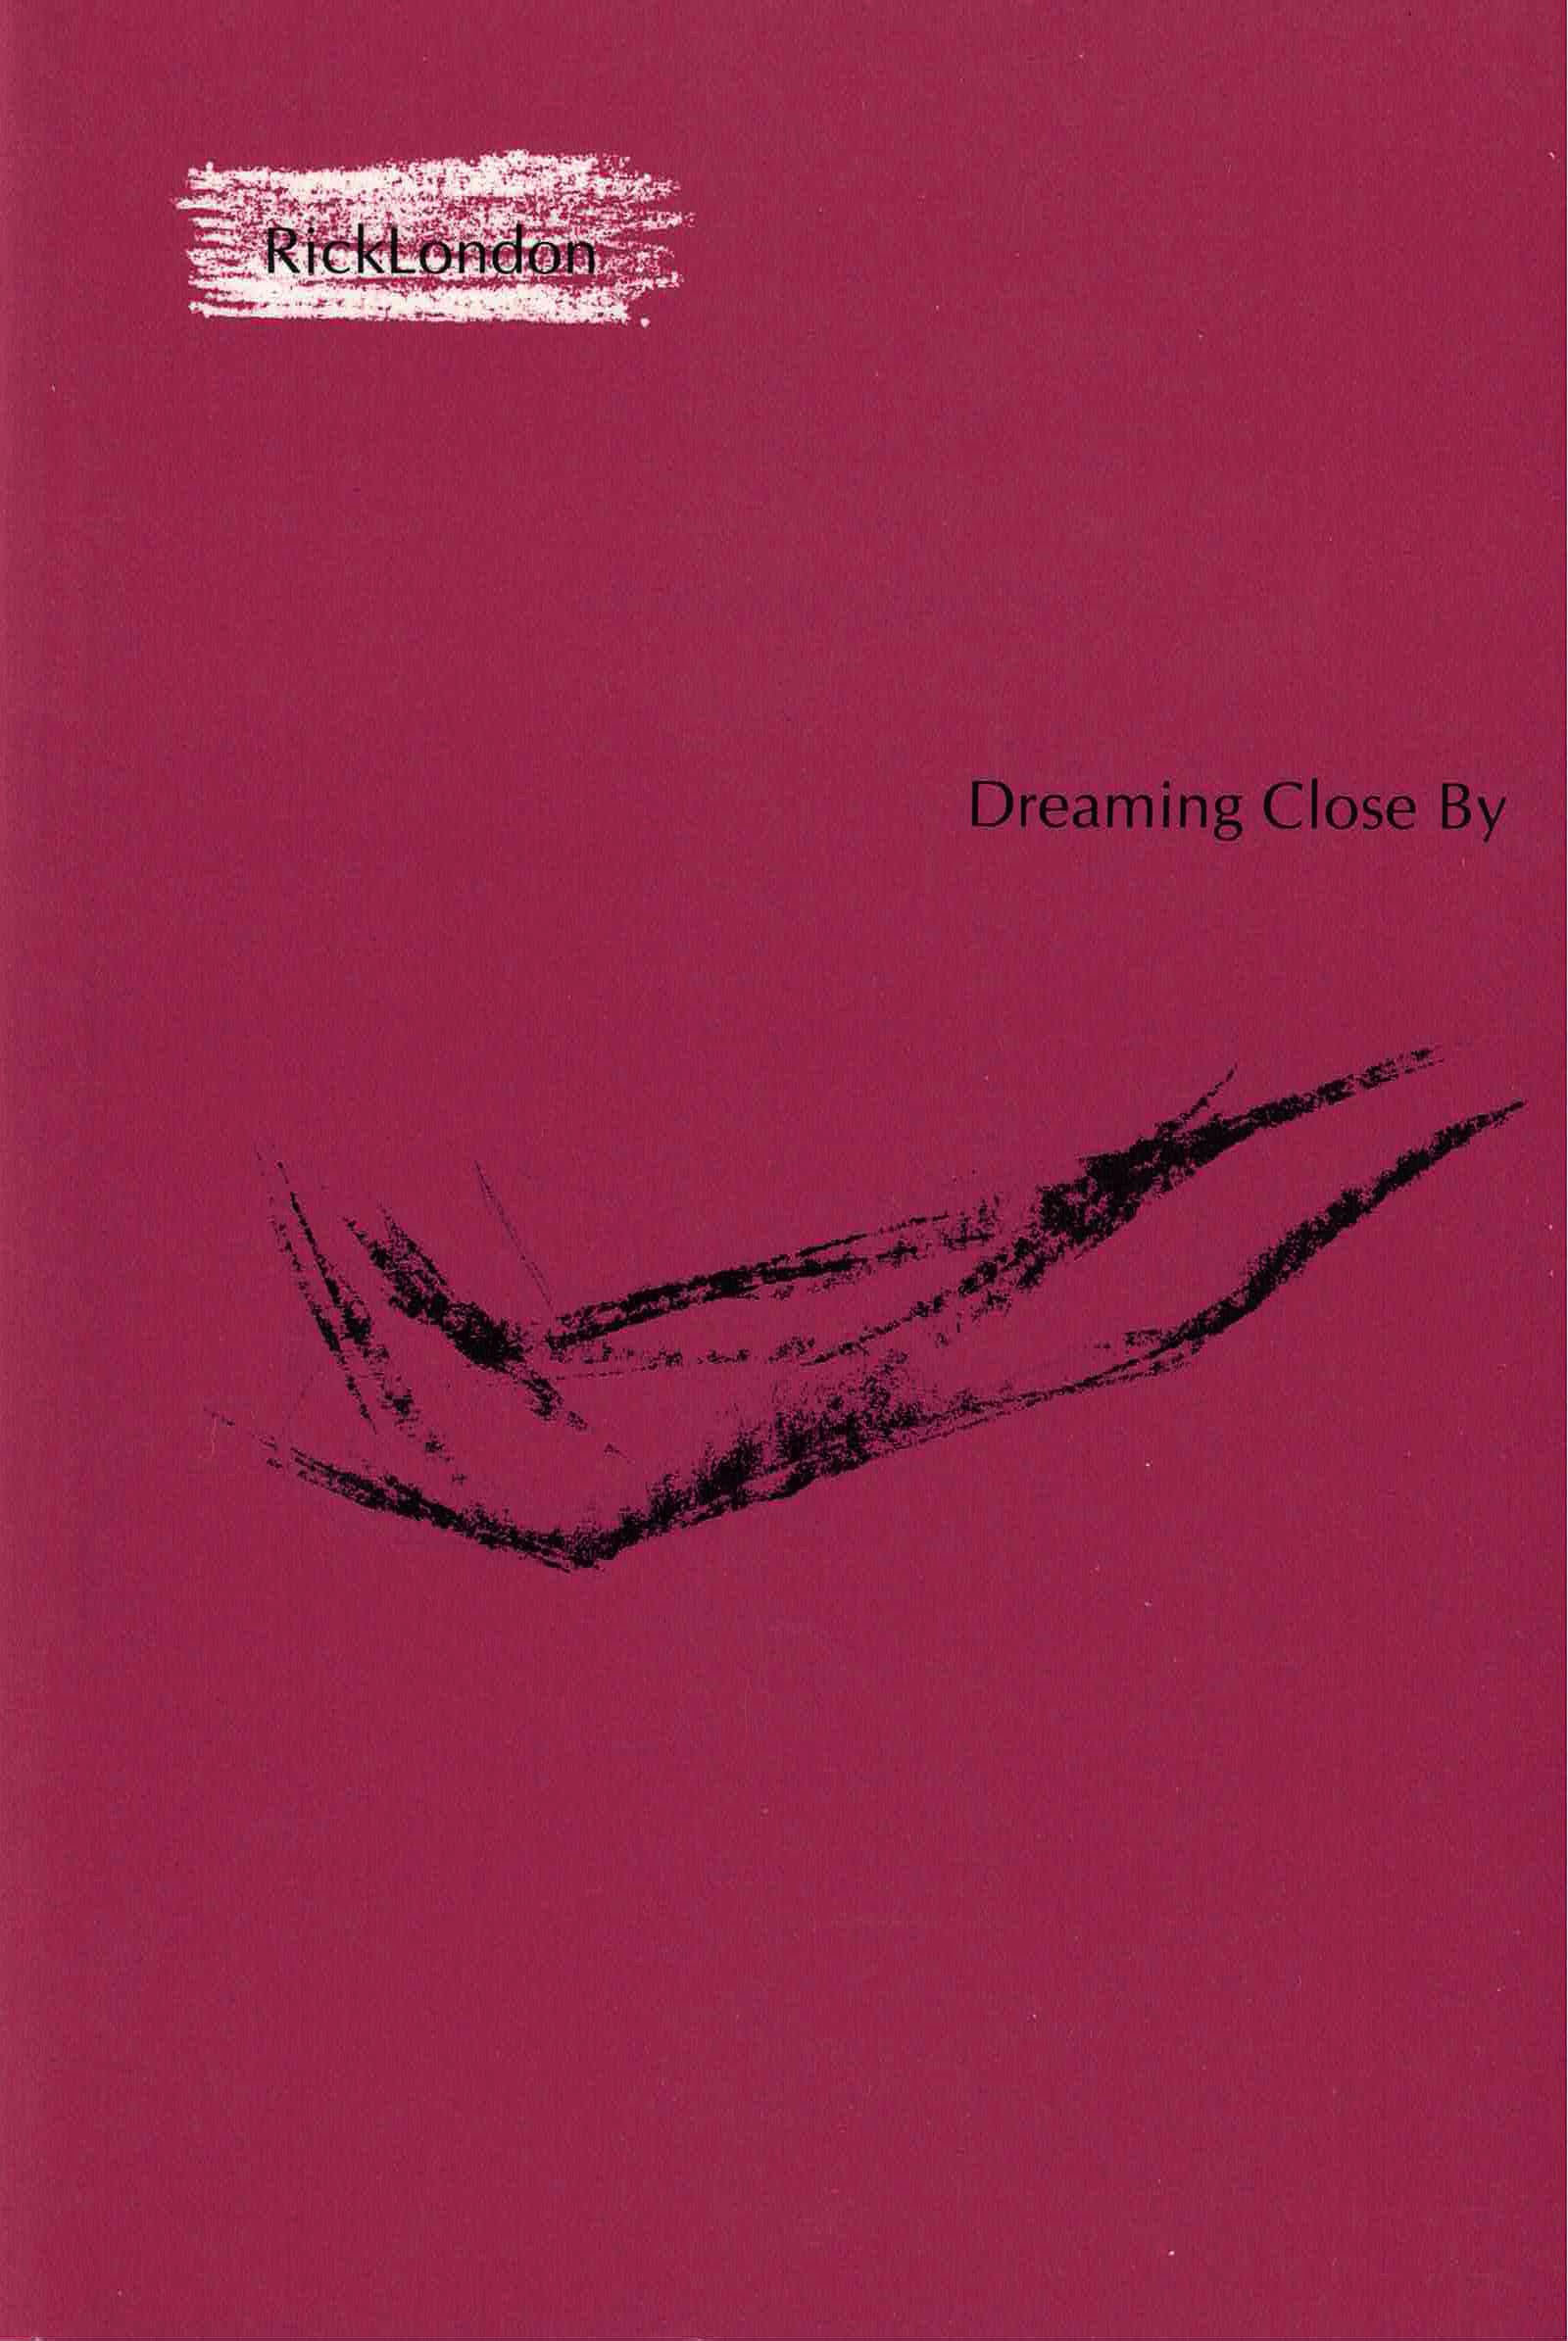 cover of Dreaming Close By by Rick London; brownish-red background with black ink brush strokes across the middle